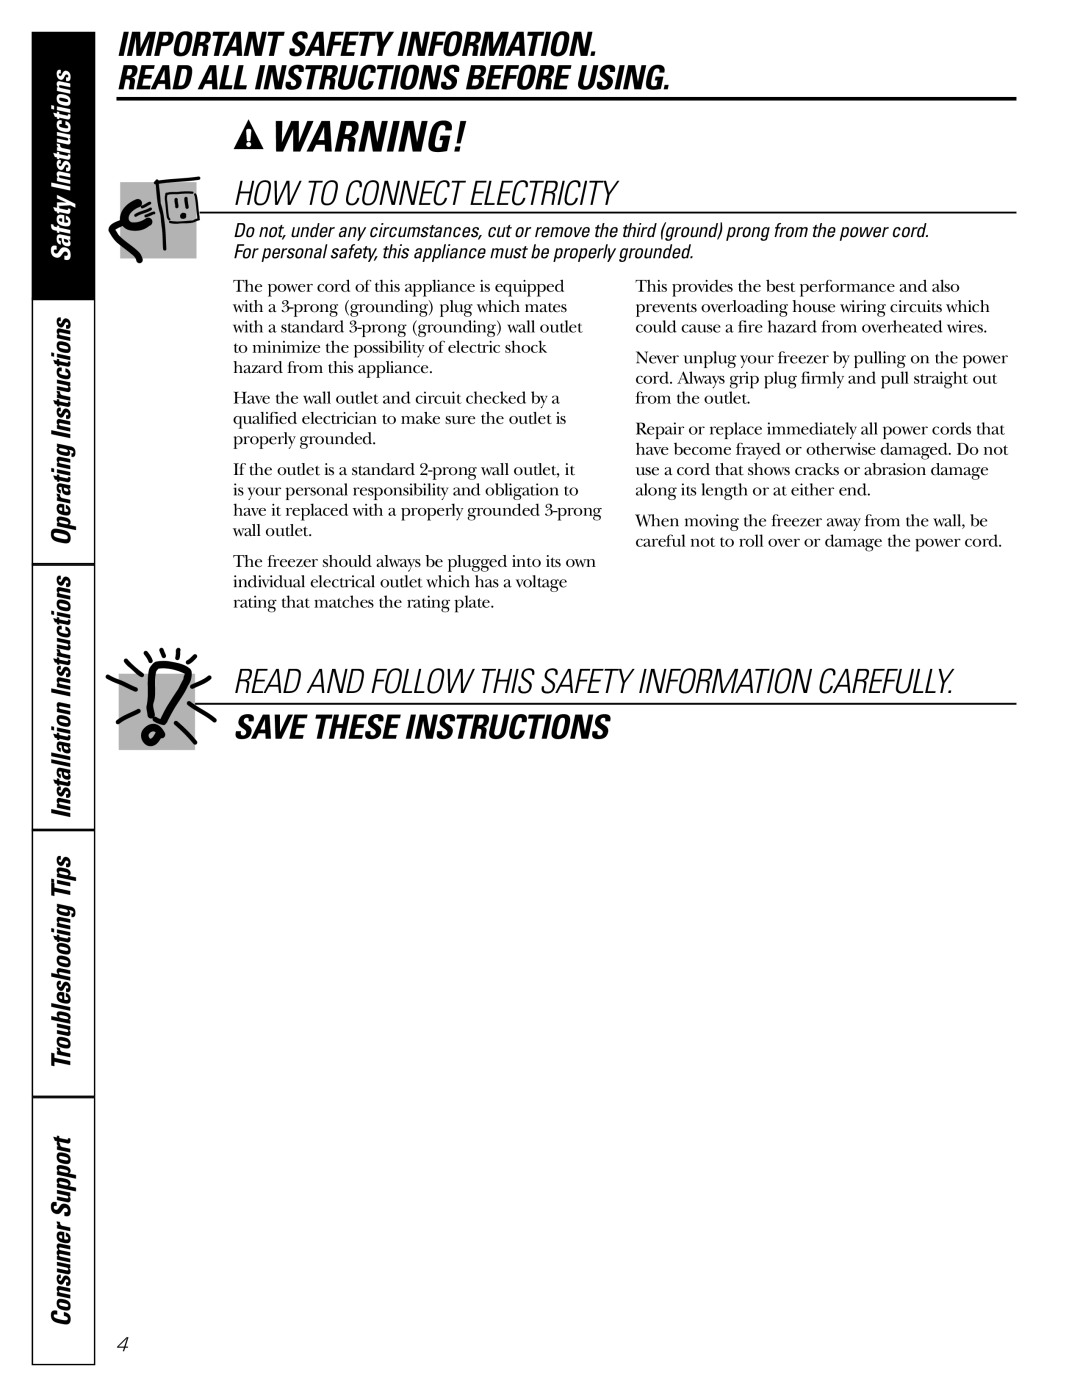 GE FCM5 How To Connect Electricity, Save These Instructions, Instructions Operating Instructions, Safety Instructions 